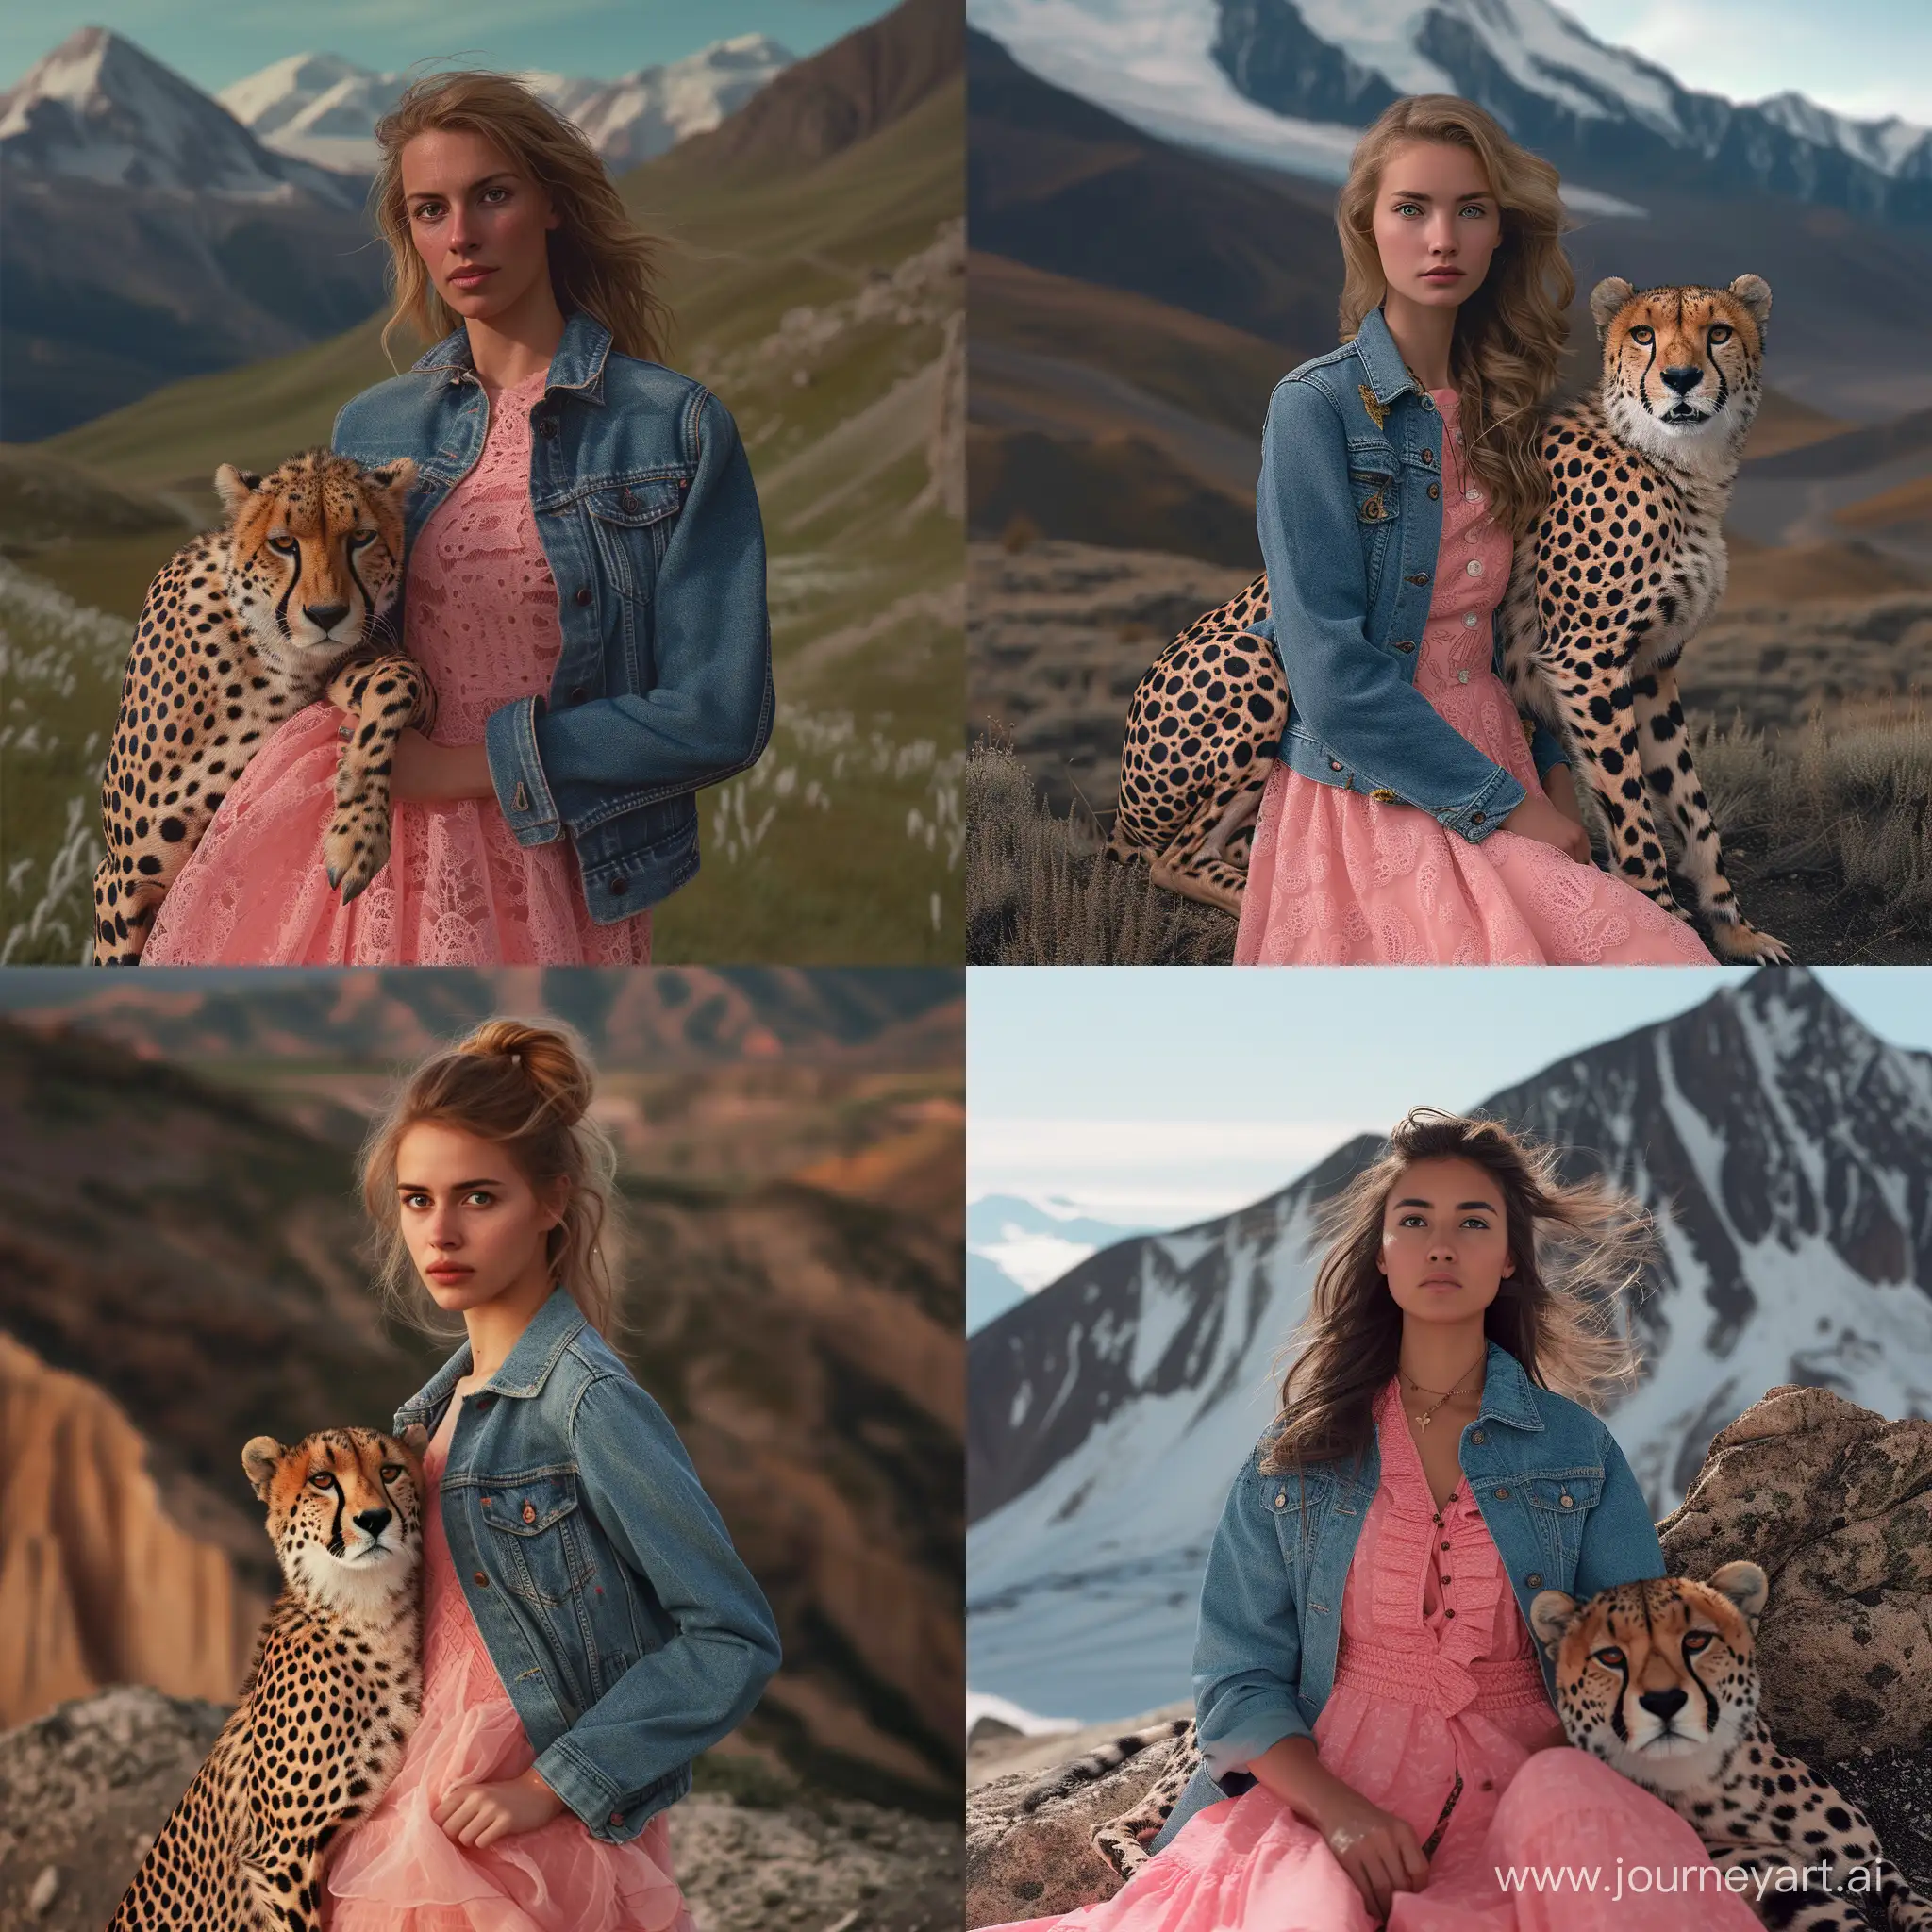 35YearOld-Female-Artist-with-Cheetah-in-Pink-Dress-and-Denim-Jacket